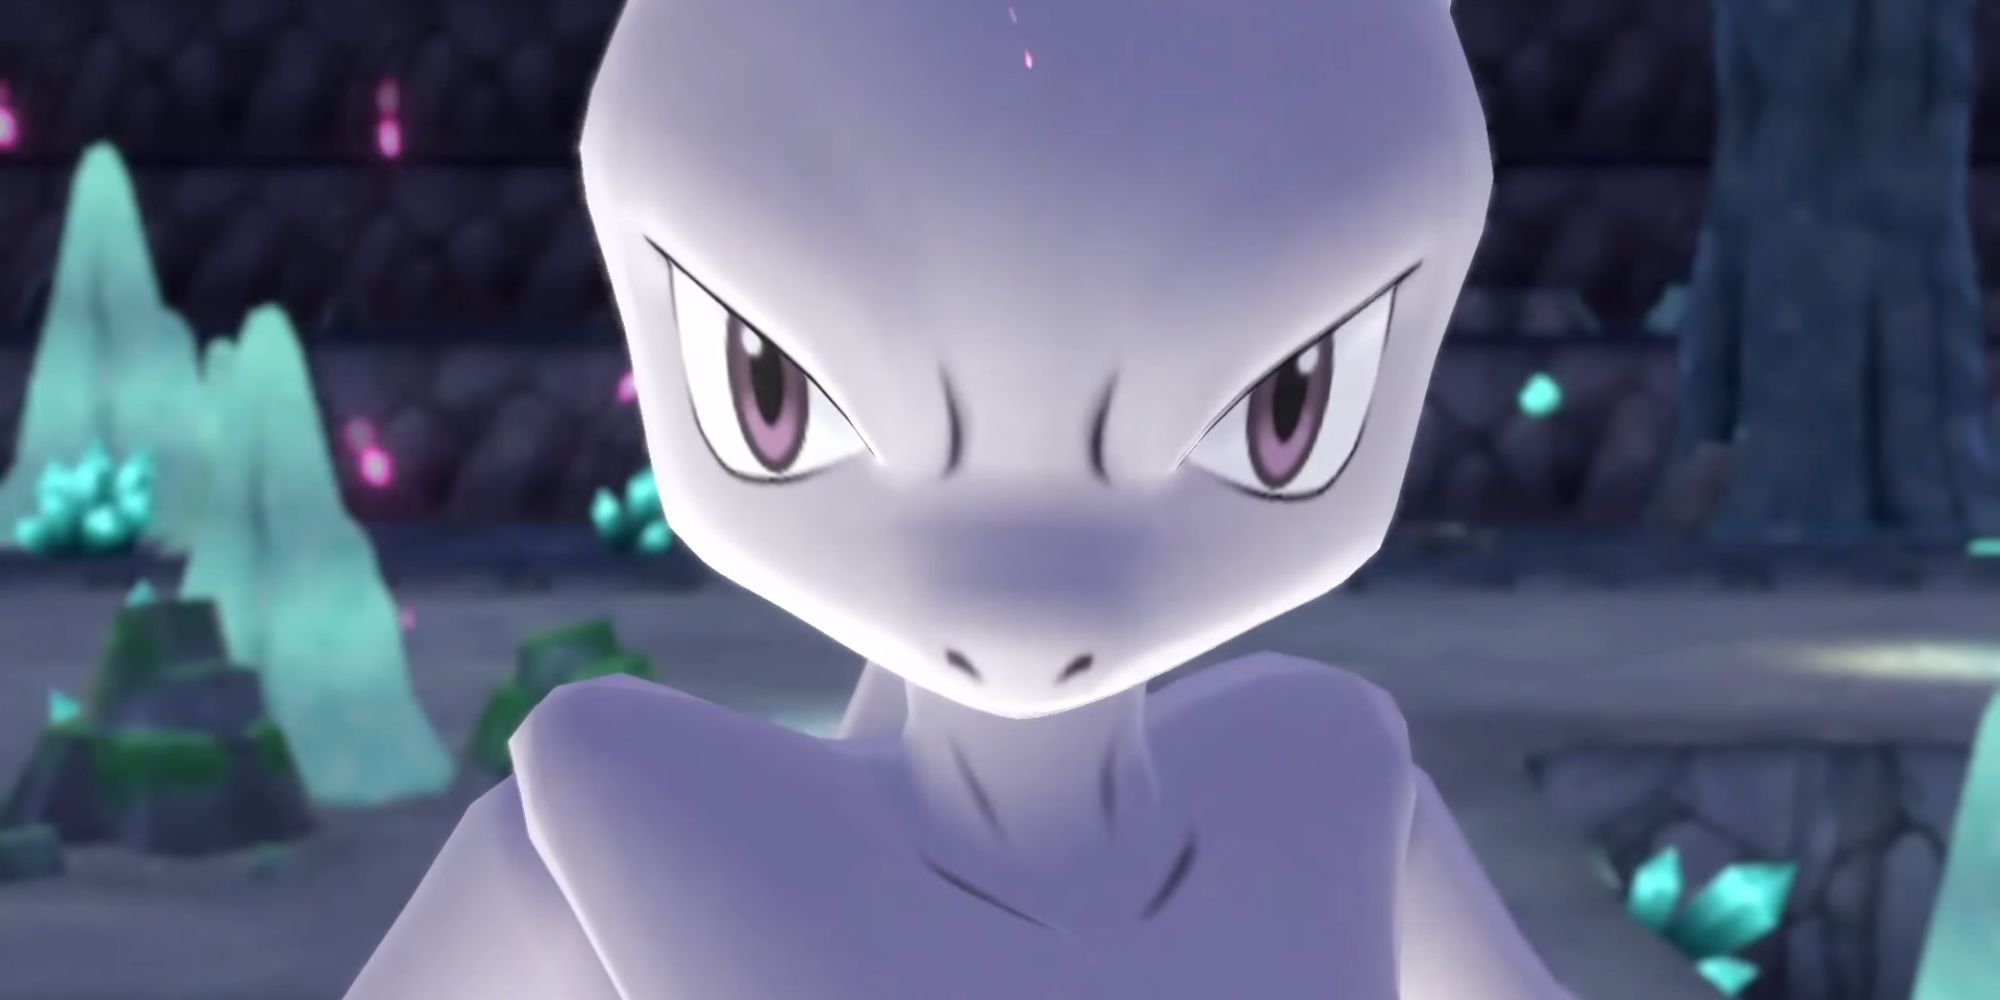 The player encounters Mewtwo in Let's Go Pikachu & Eevee.